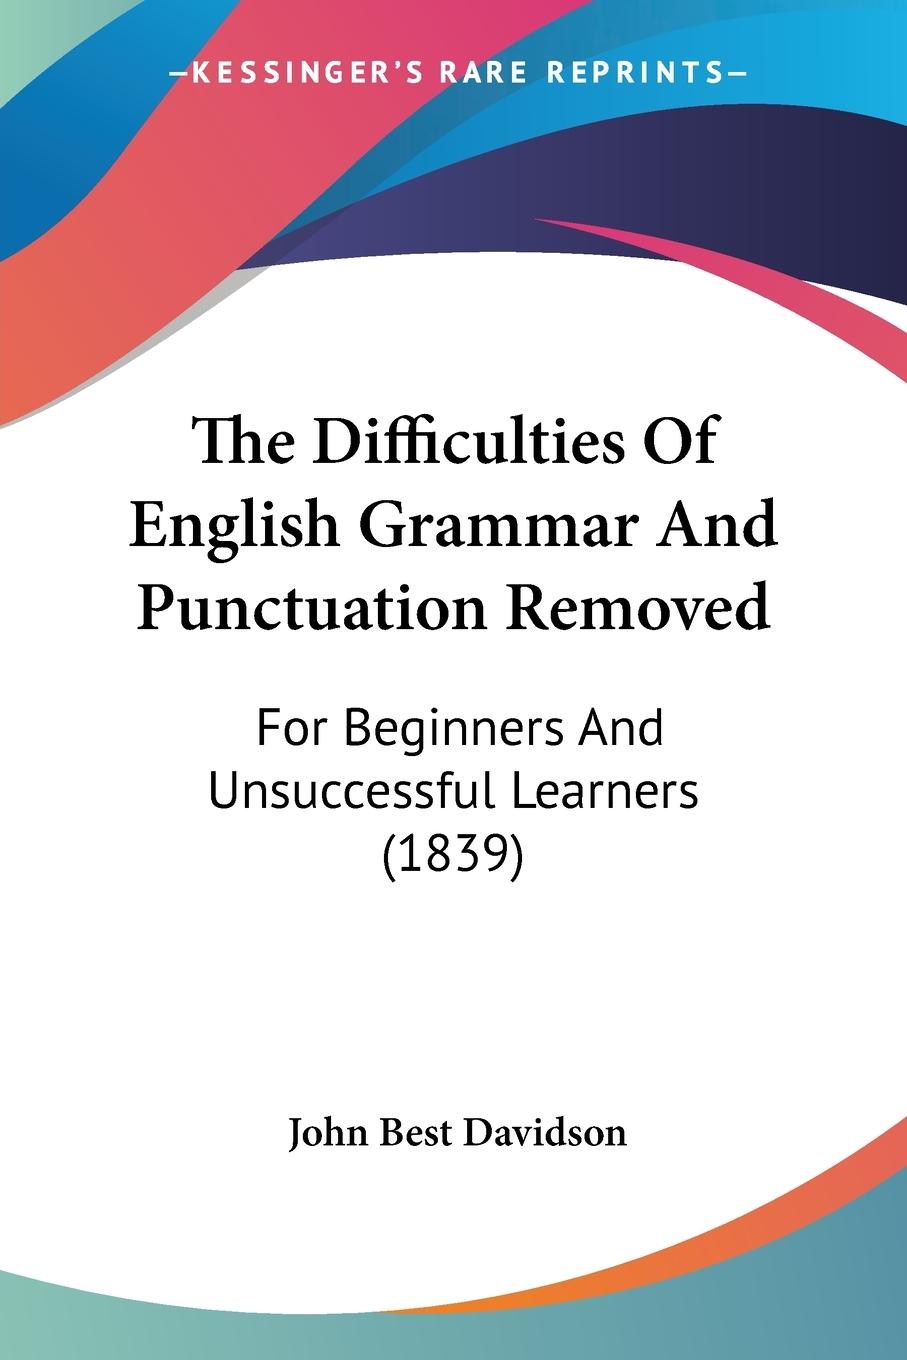 The Difficulties Of English Grammar And Punctuation Removed - Davidson, John Best